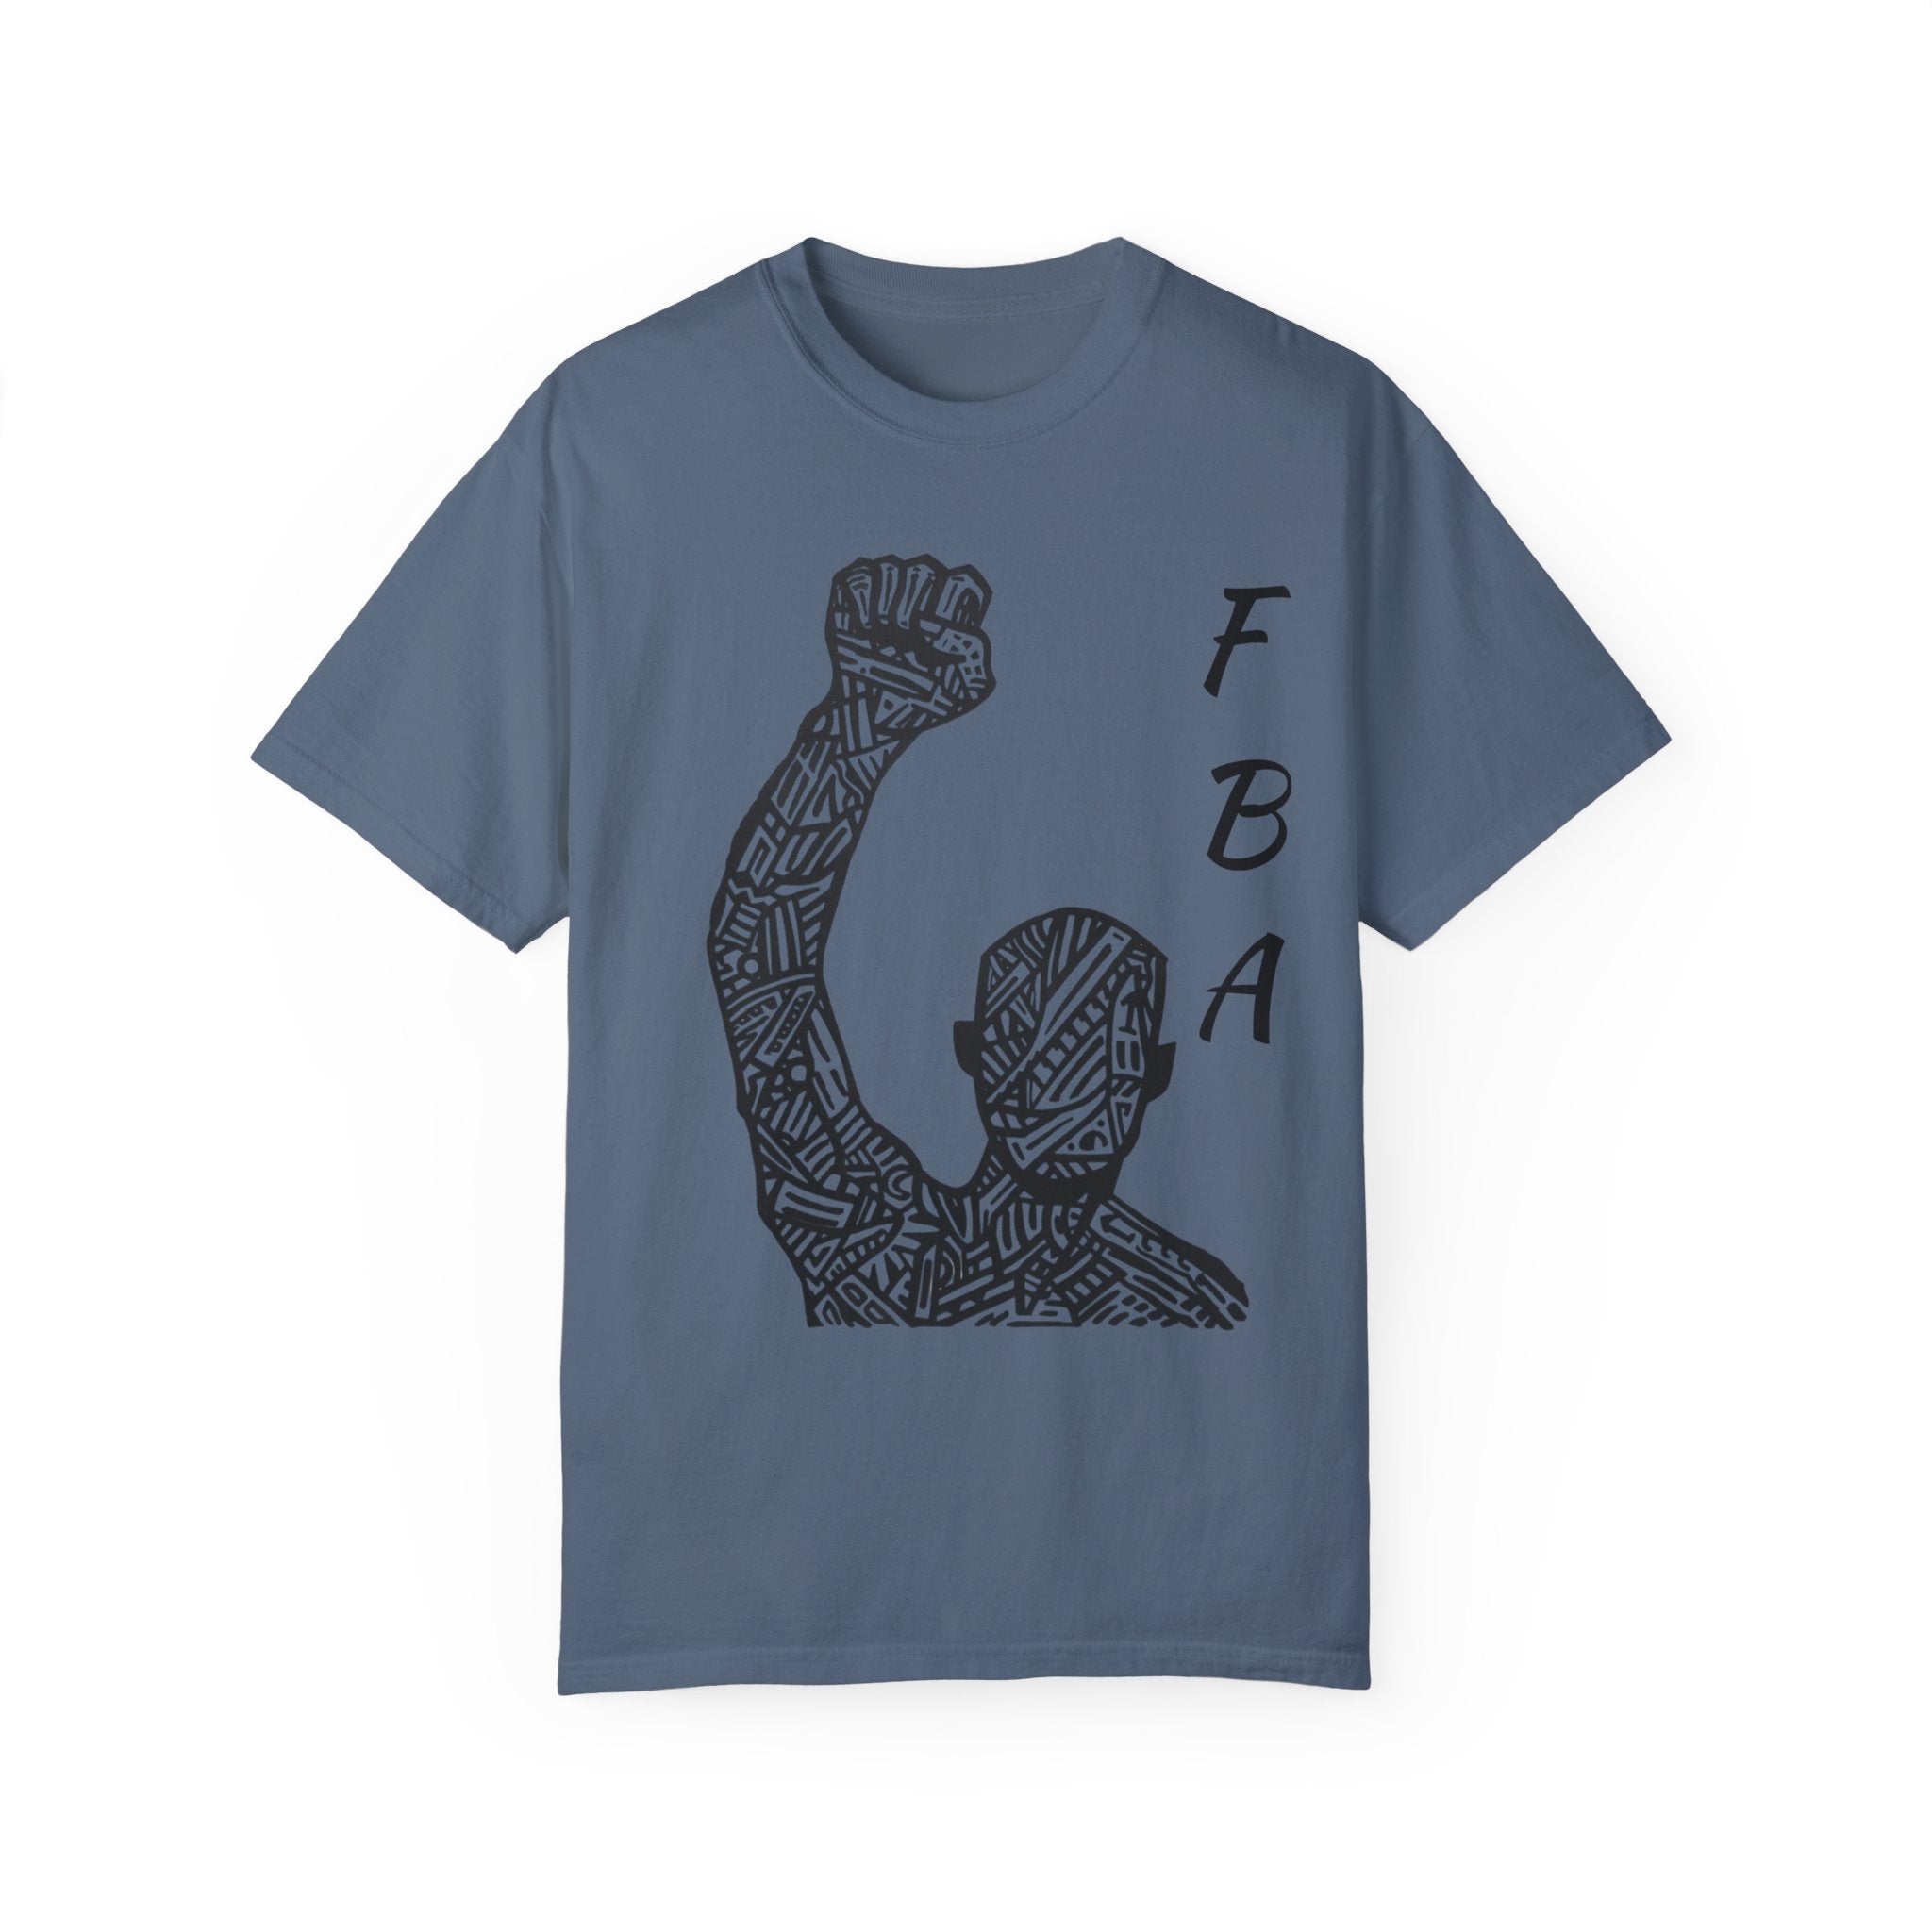 Rise in Unity: FBA Fist Rise Silhouette Unisex Garment-Dyed T-Shirt - Empowerment Through Heritage